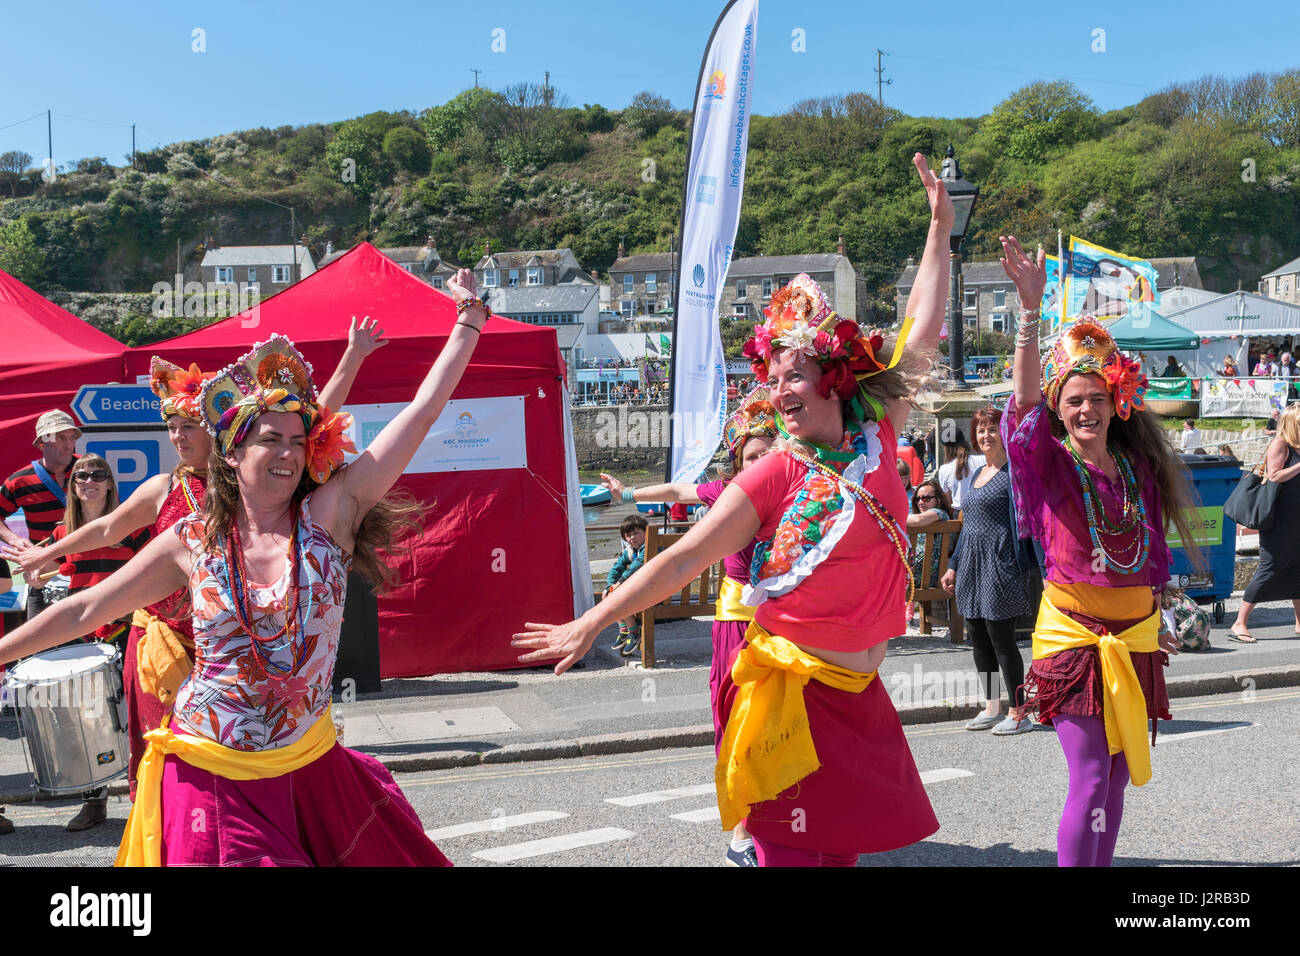 Young women dance group at the Food and Music festival in Porthleven, Cornwall, England, UK Stock Photo